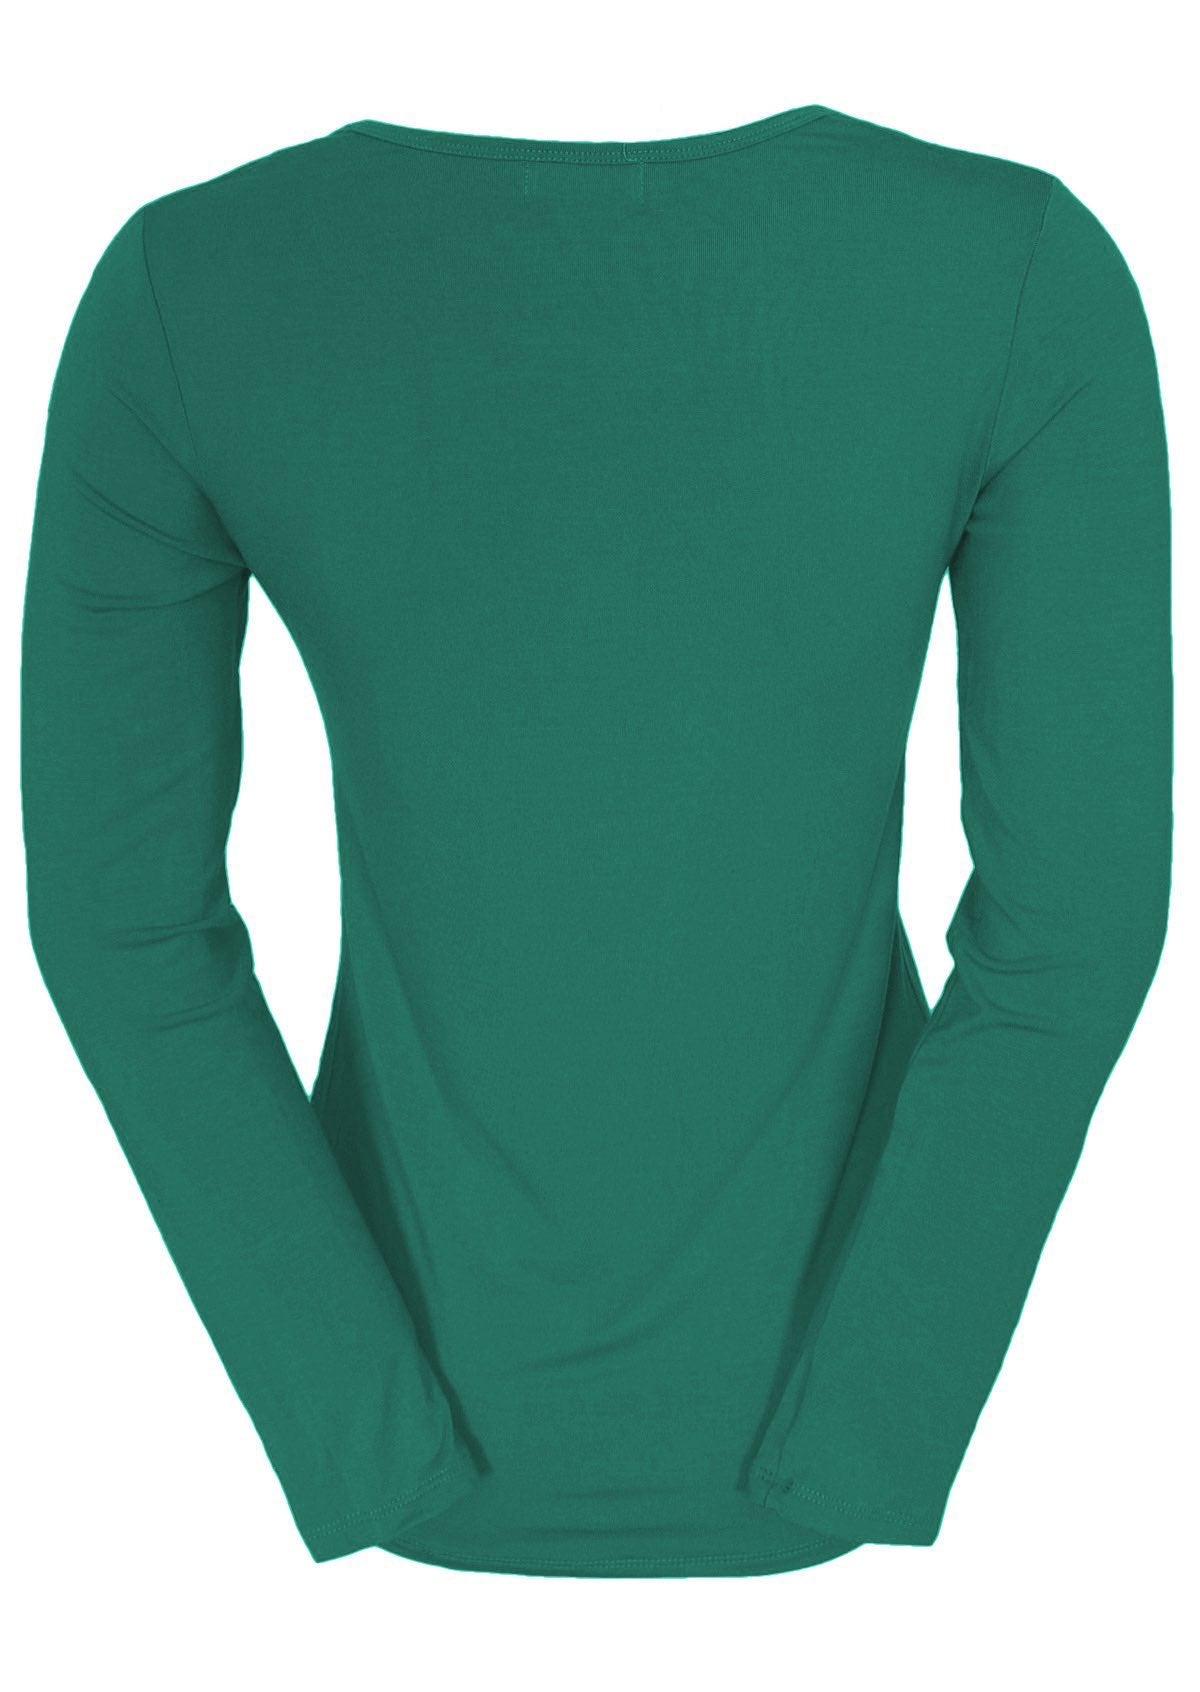 Back view of women's round neck green long sleeve rayon top.